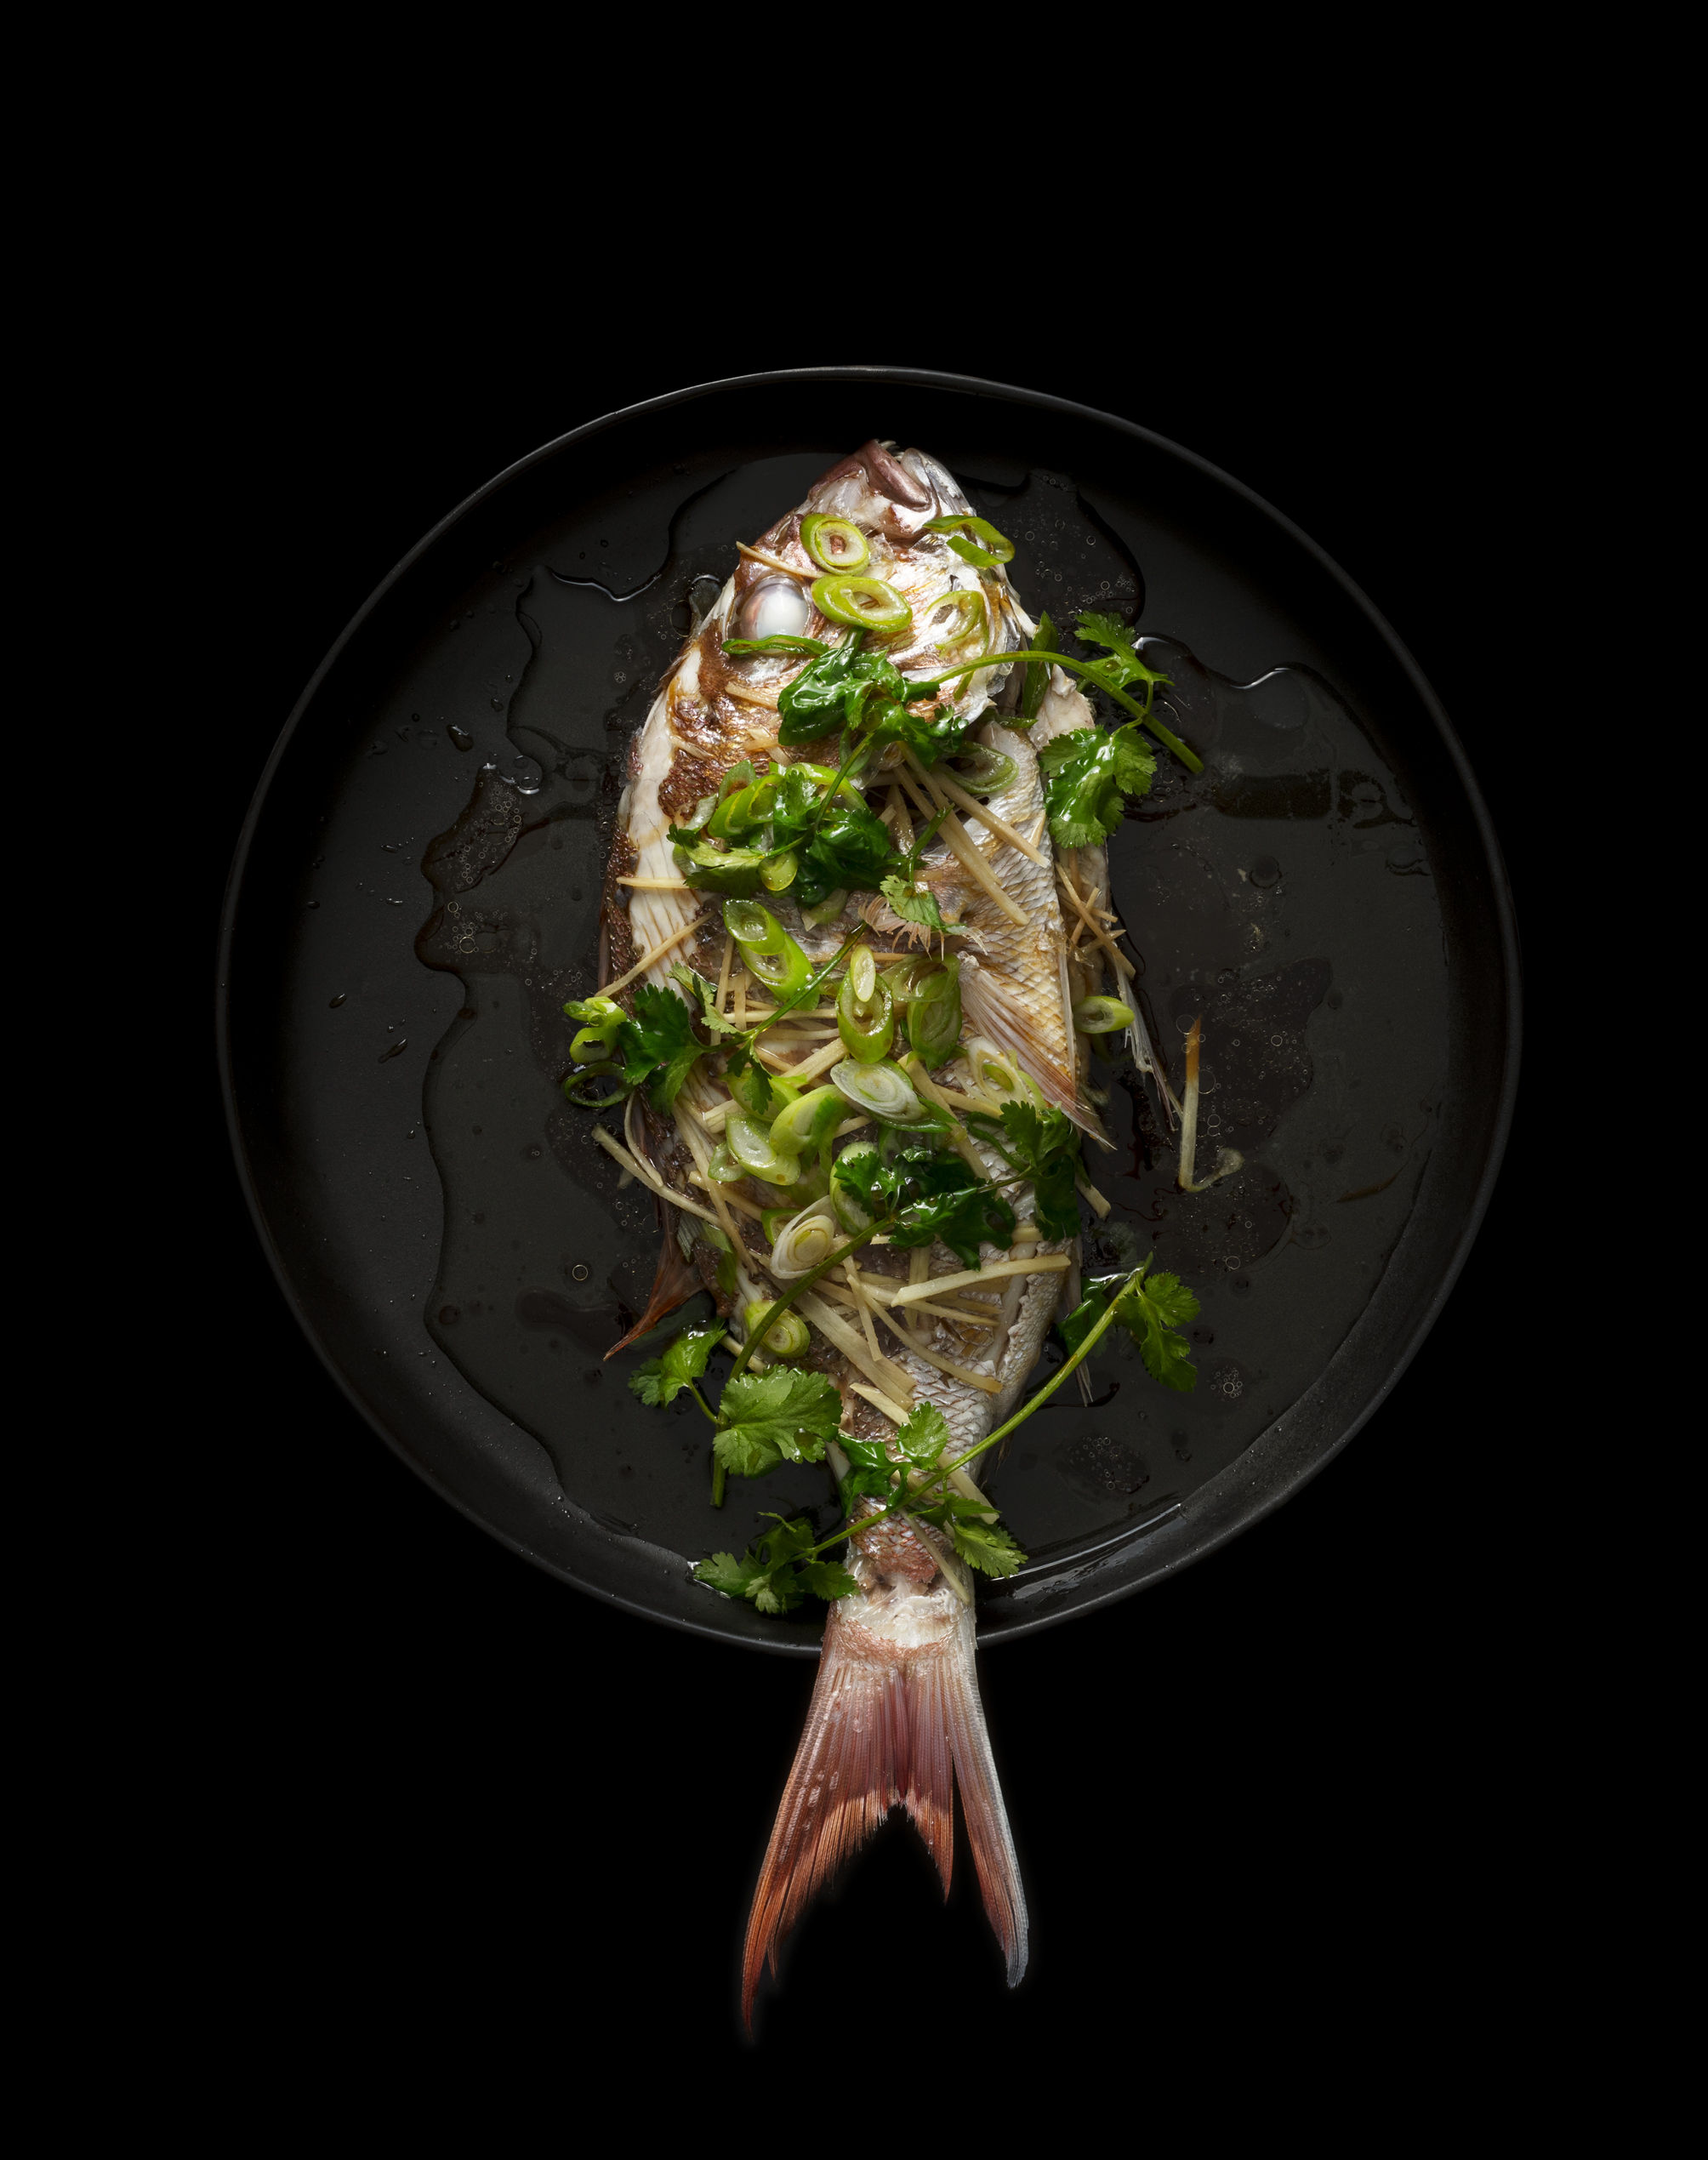 Steamed Whole Fish with Ginger, Scallions & Soy_Charles Phan_image copyright © Kieran E. Scott.jpg